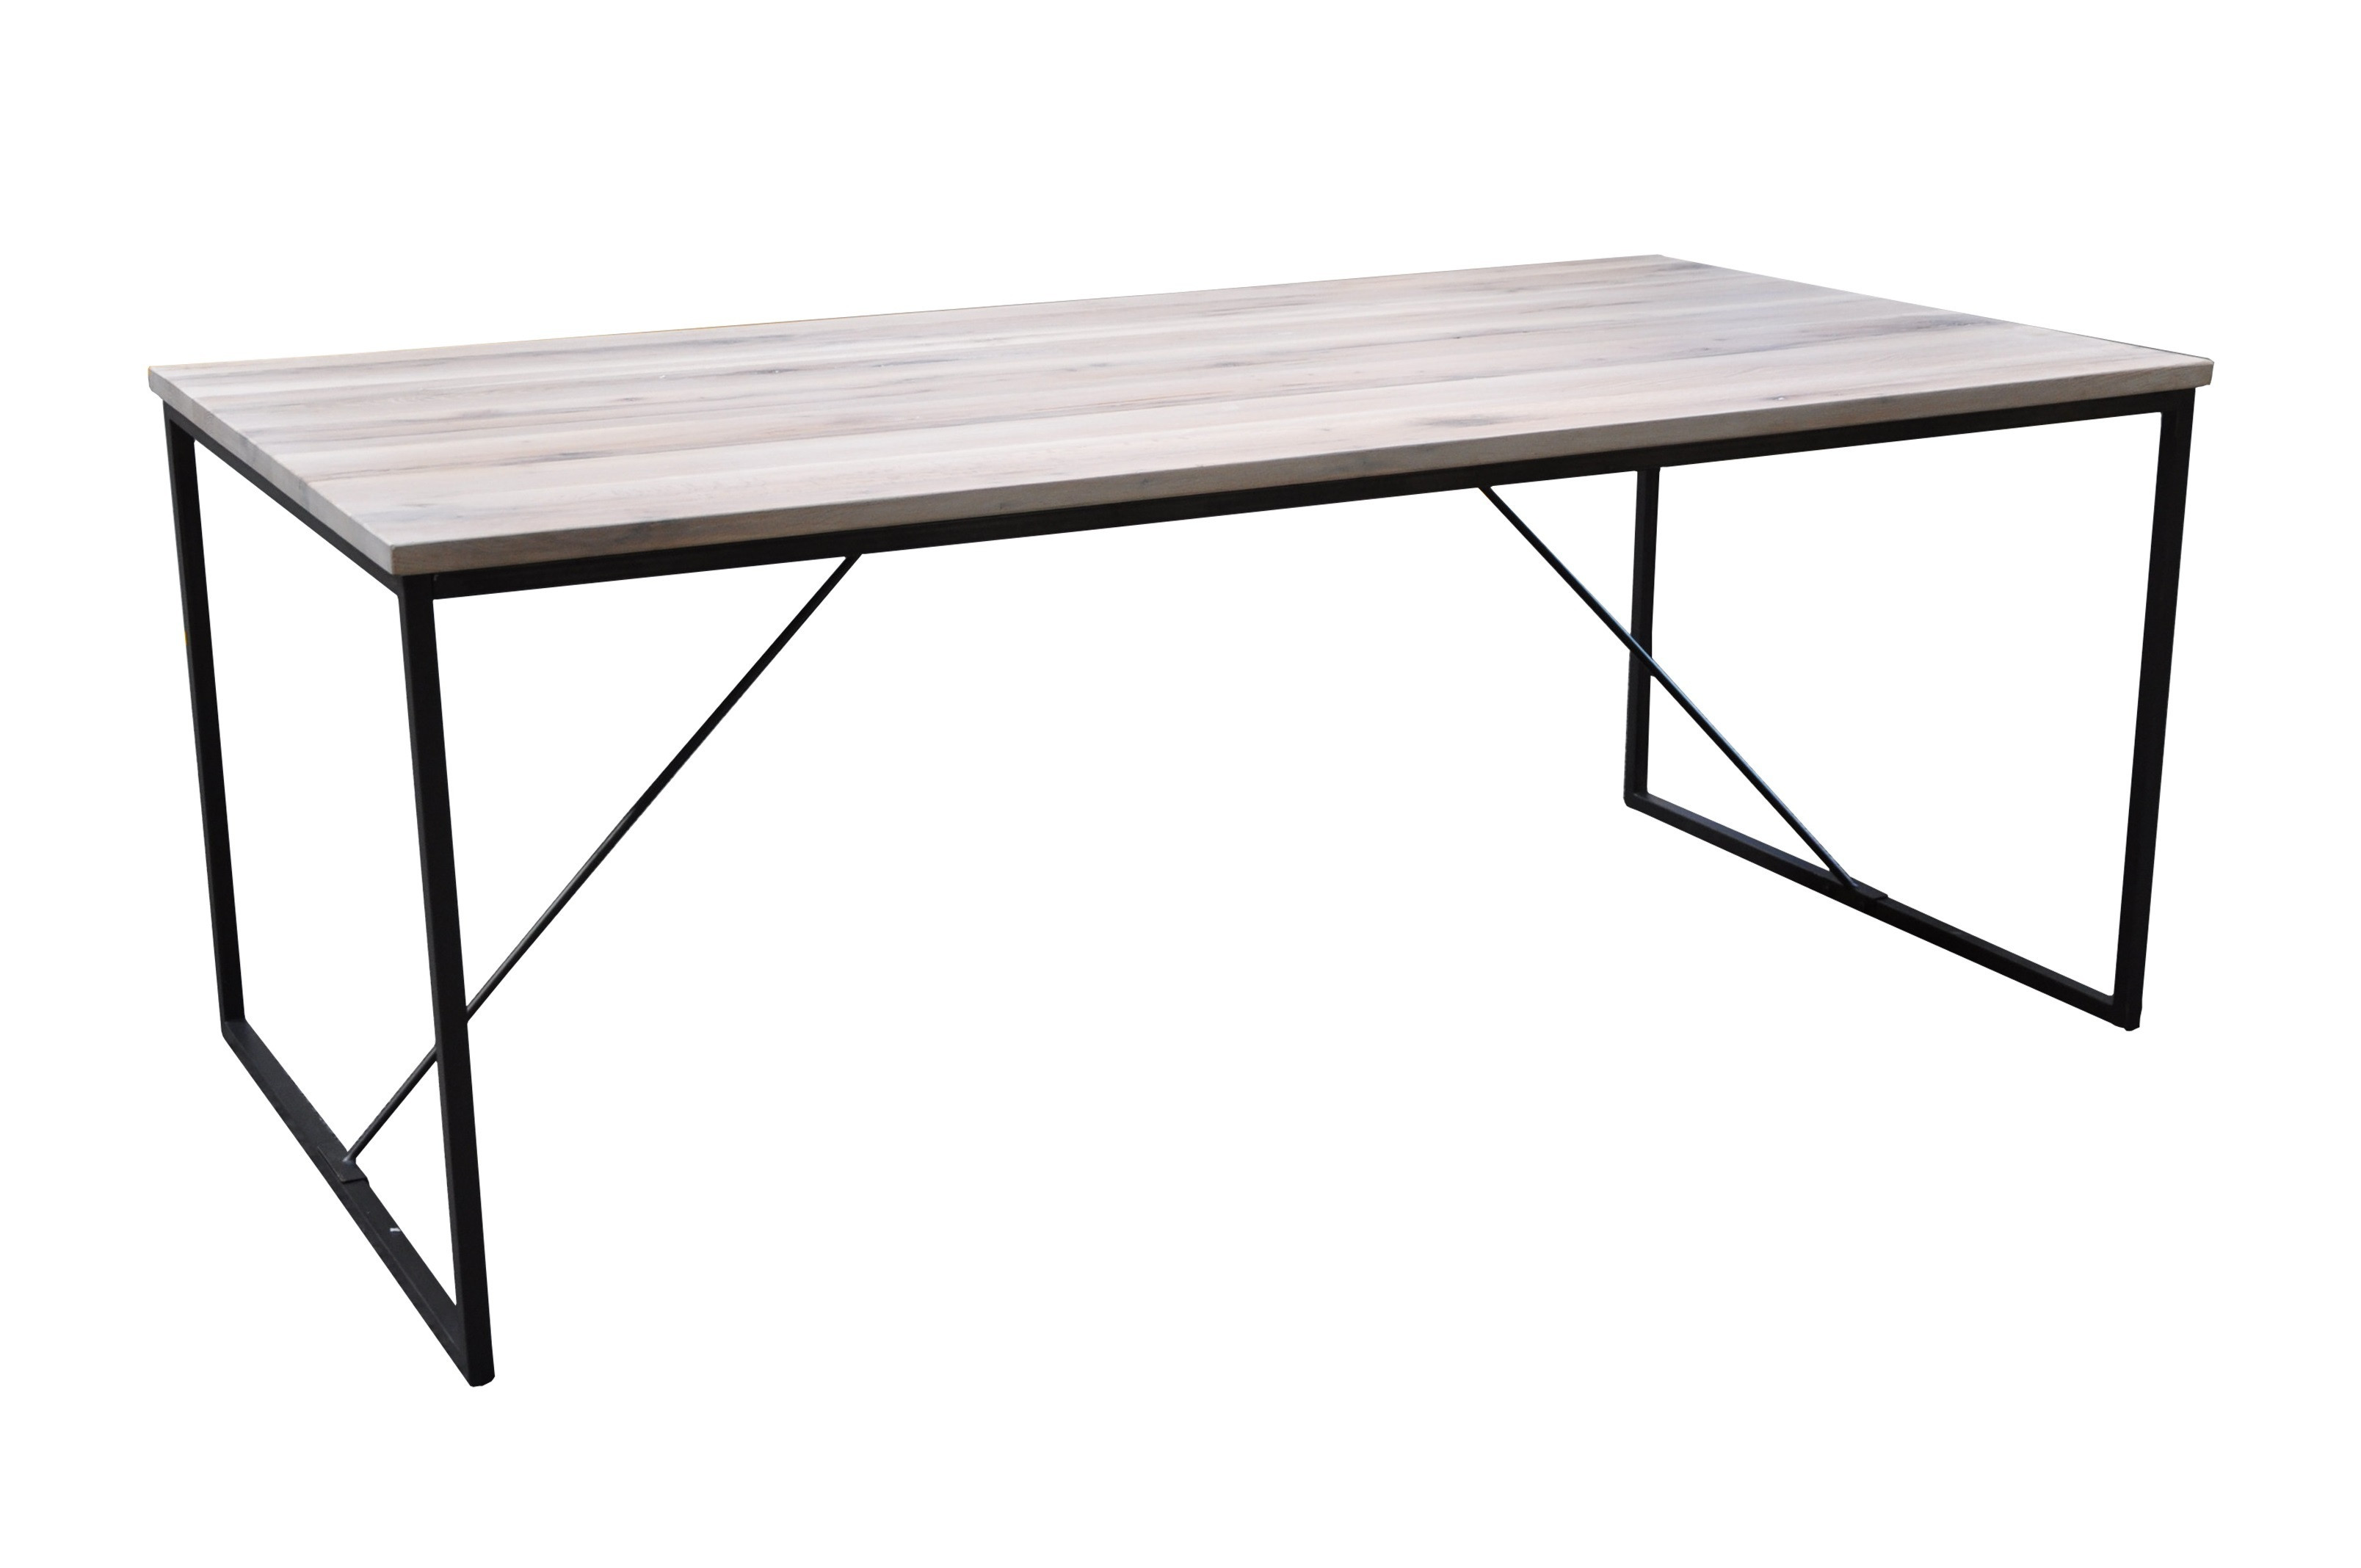 Rent a Dining table Evia 200cm white wash? Rent at KeyPro furniture rental!